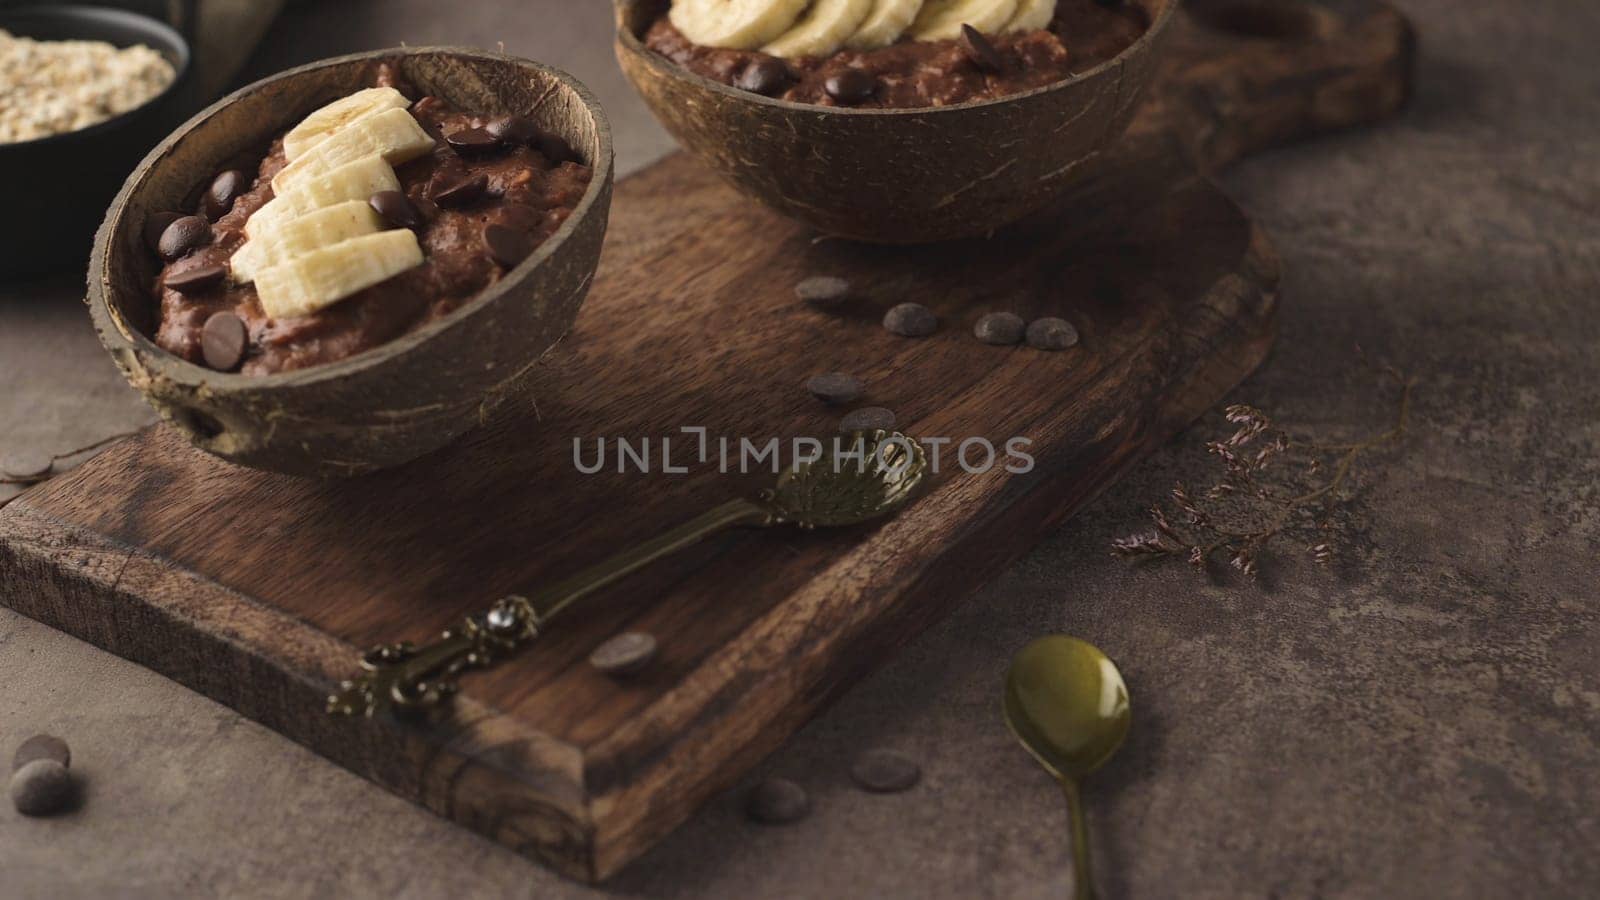 Coconut bowls with oat porridge with banana and round chocolate chips.